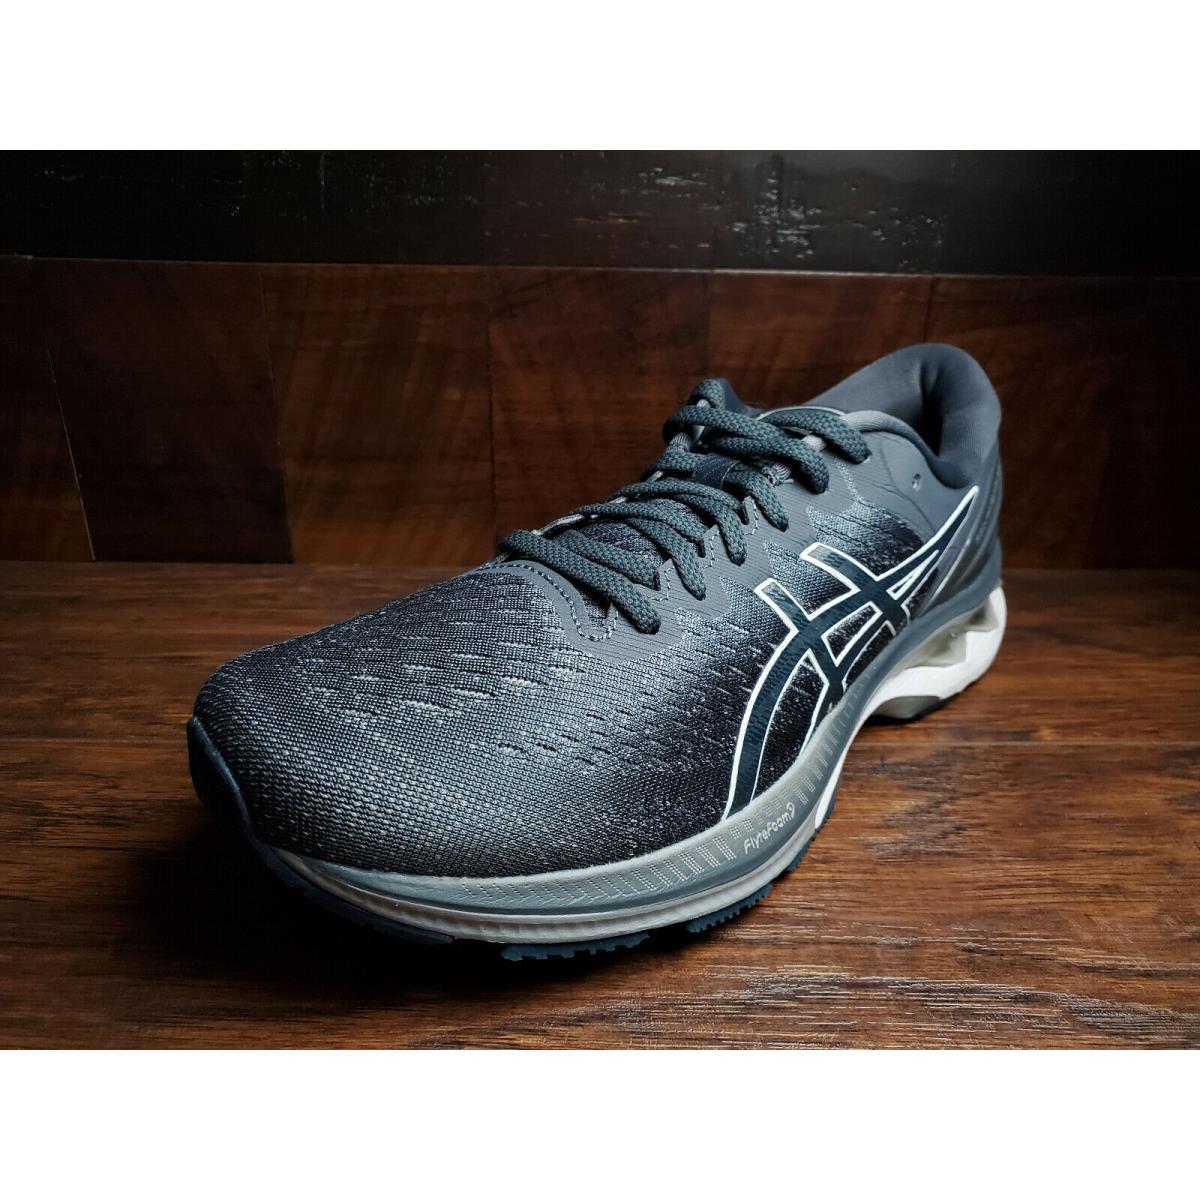 ASICS shoes Gel Kayano - Carrier Grey / French Blue 0